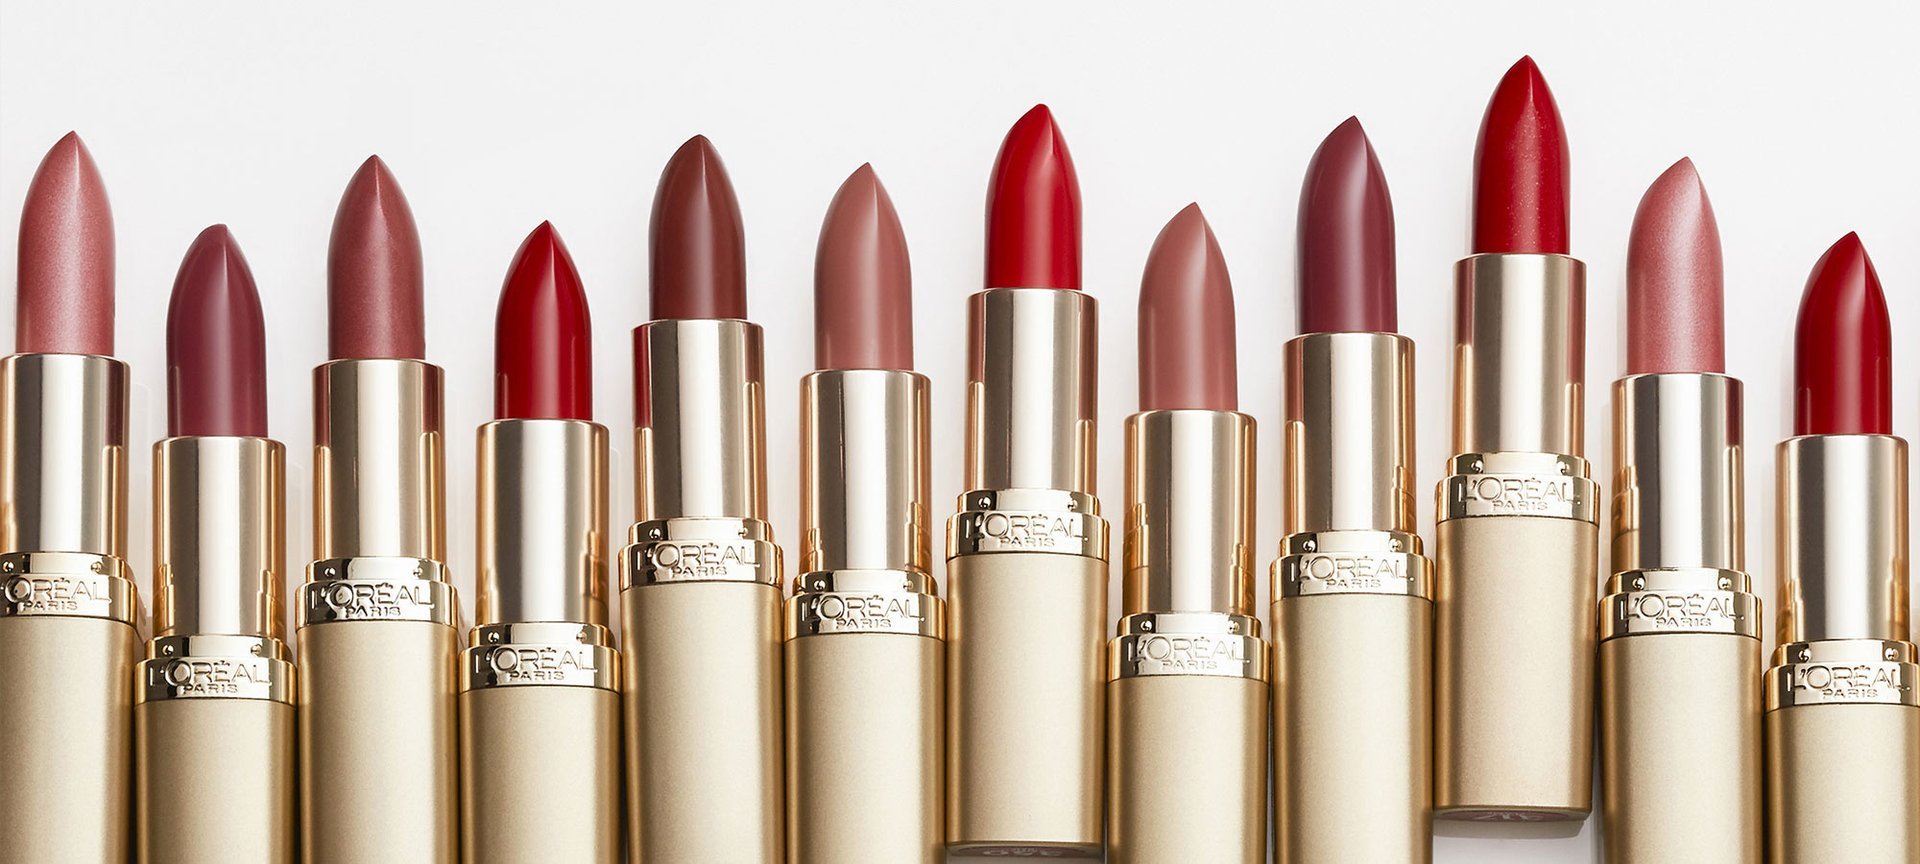 Tips to Find Your Signature Lipstick Shade | L'Oréal Paris